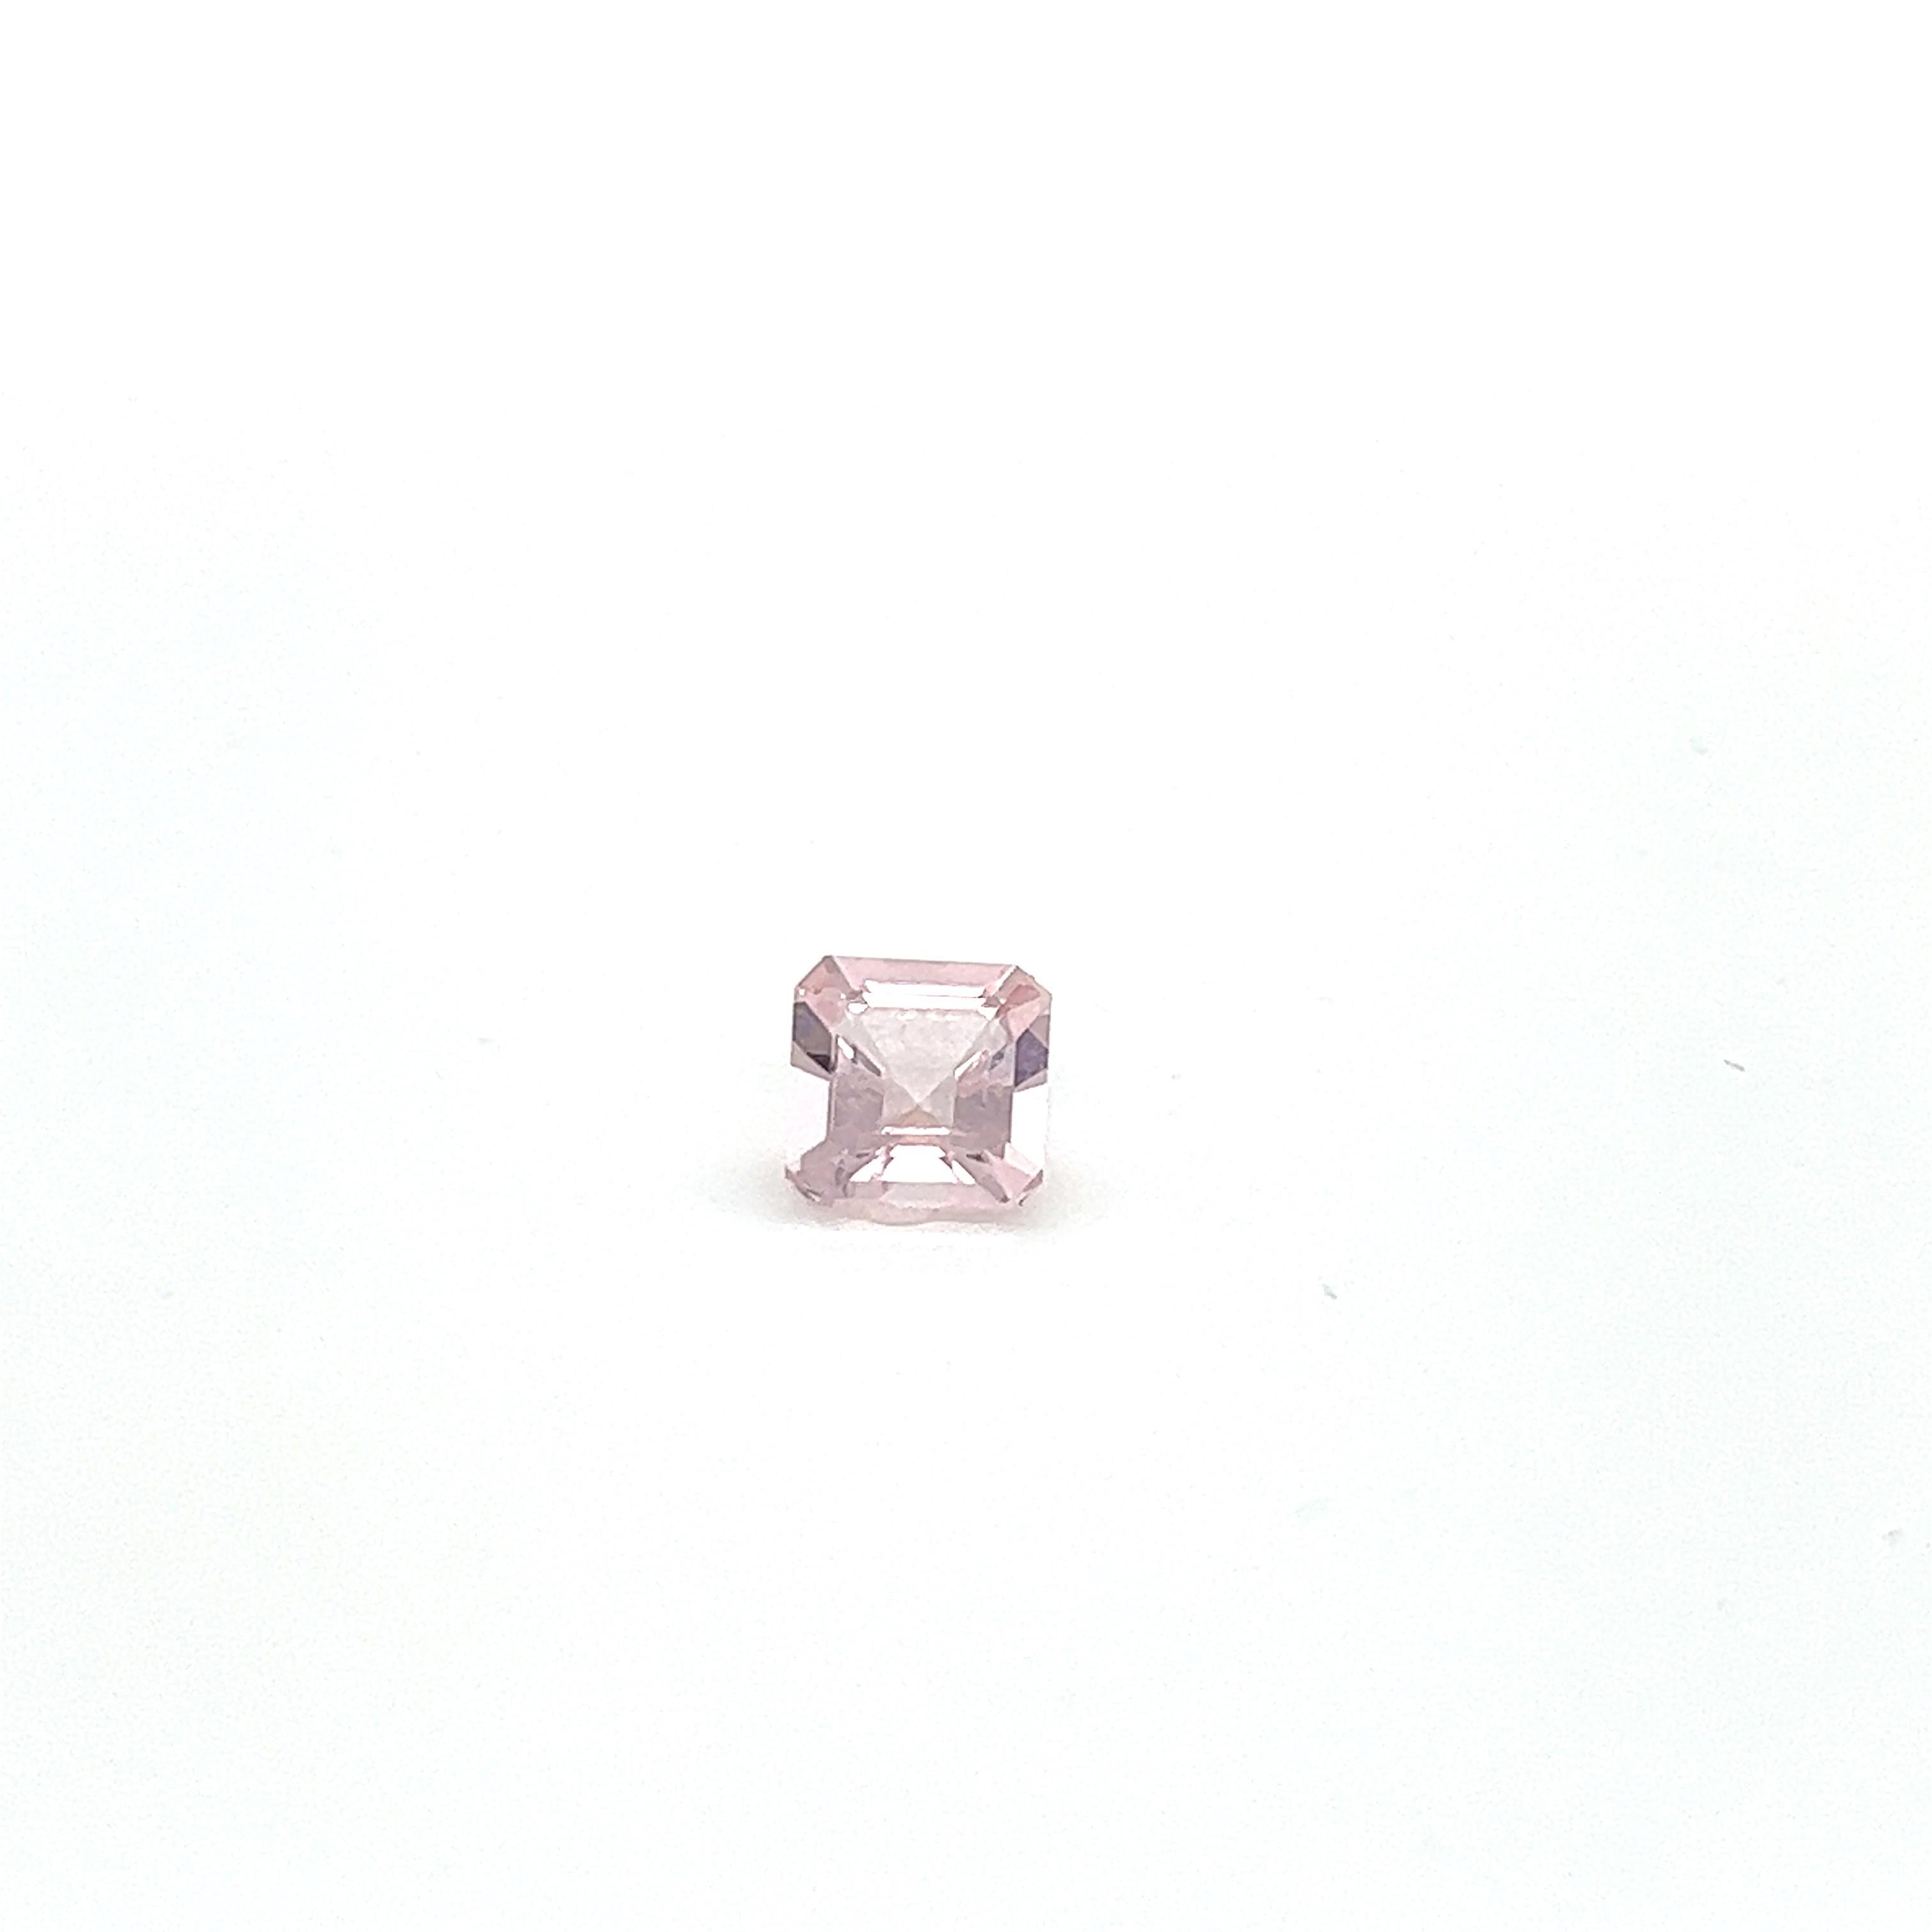 1.37 Carat AAA Natural Pink Morganite Asher Cut Shape Loose Gemstone Jewelry In New Condition For Sale In New York, NY